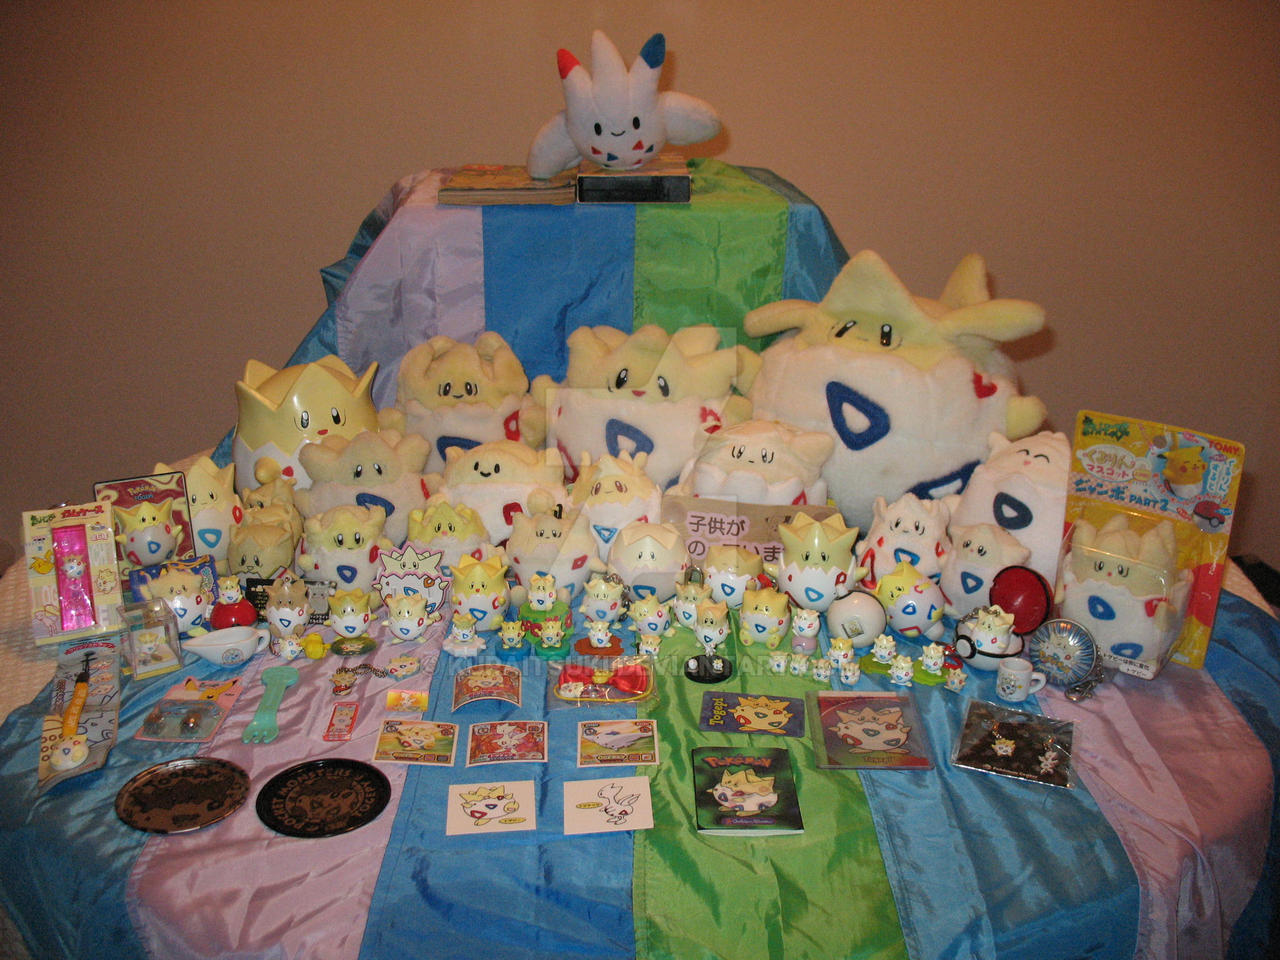 My Togepi collection